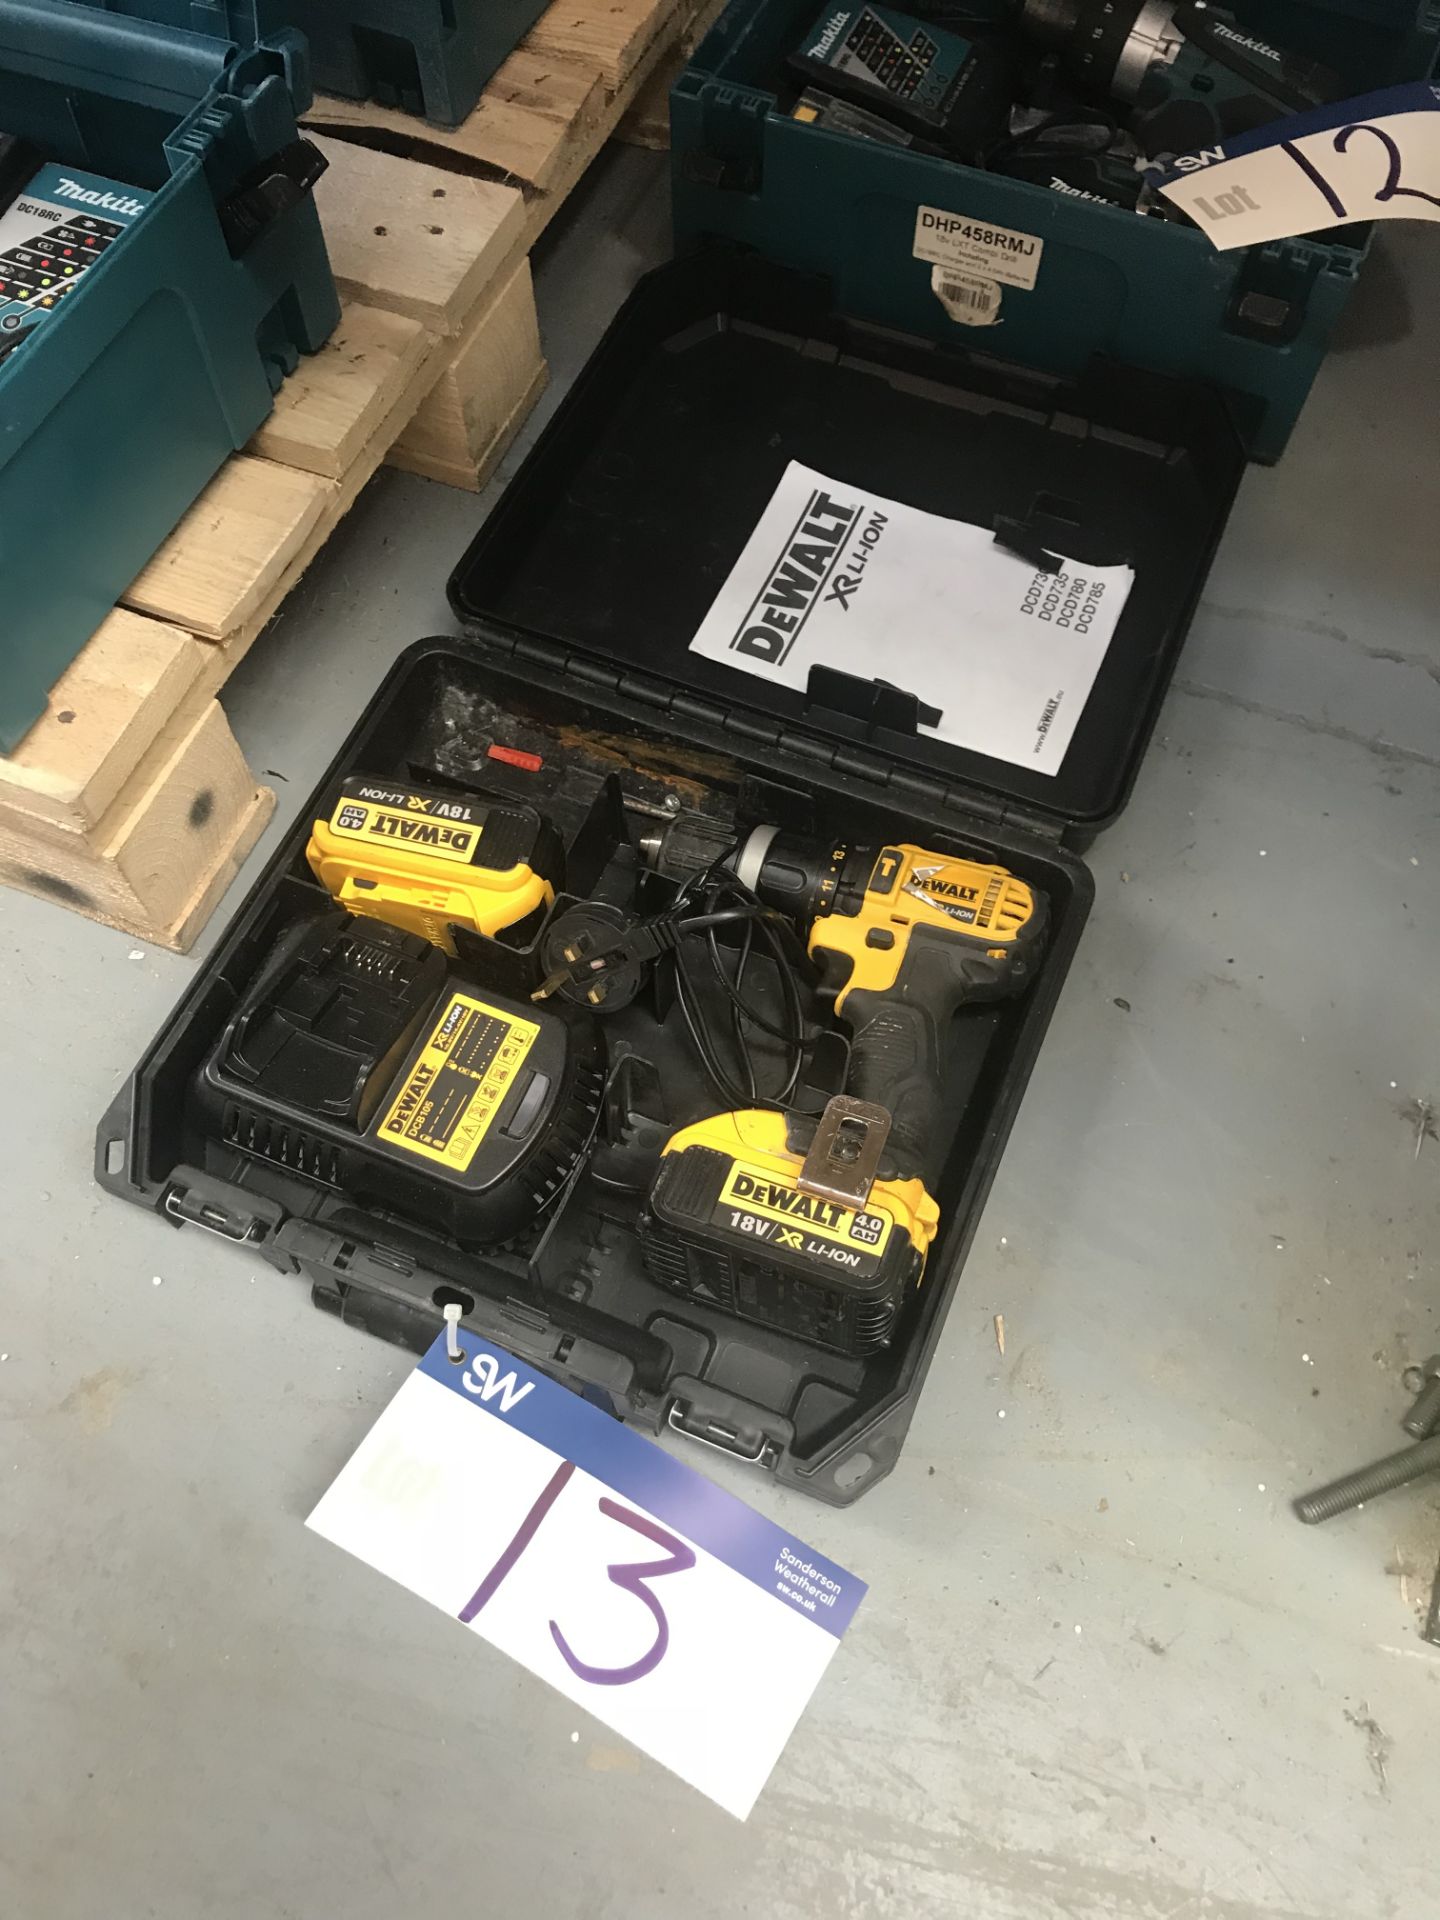 DeWalt 18V Cordless DCD785 Drill, c/w spare battery, battery charger and case